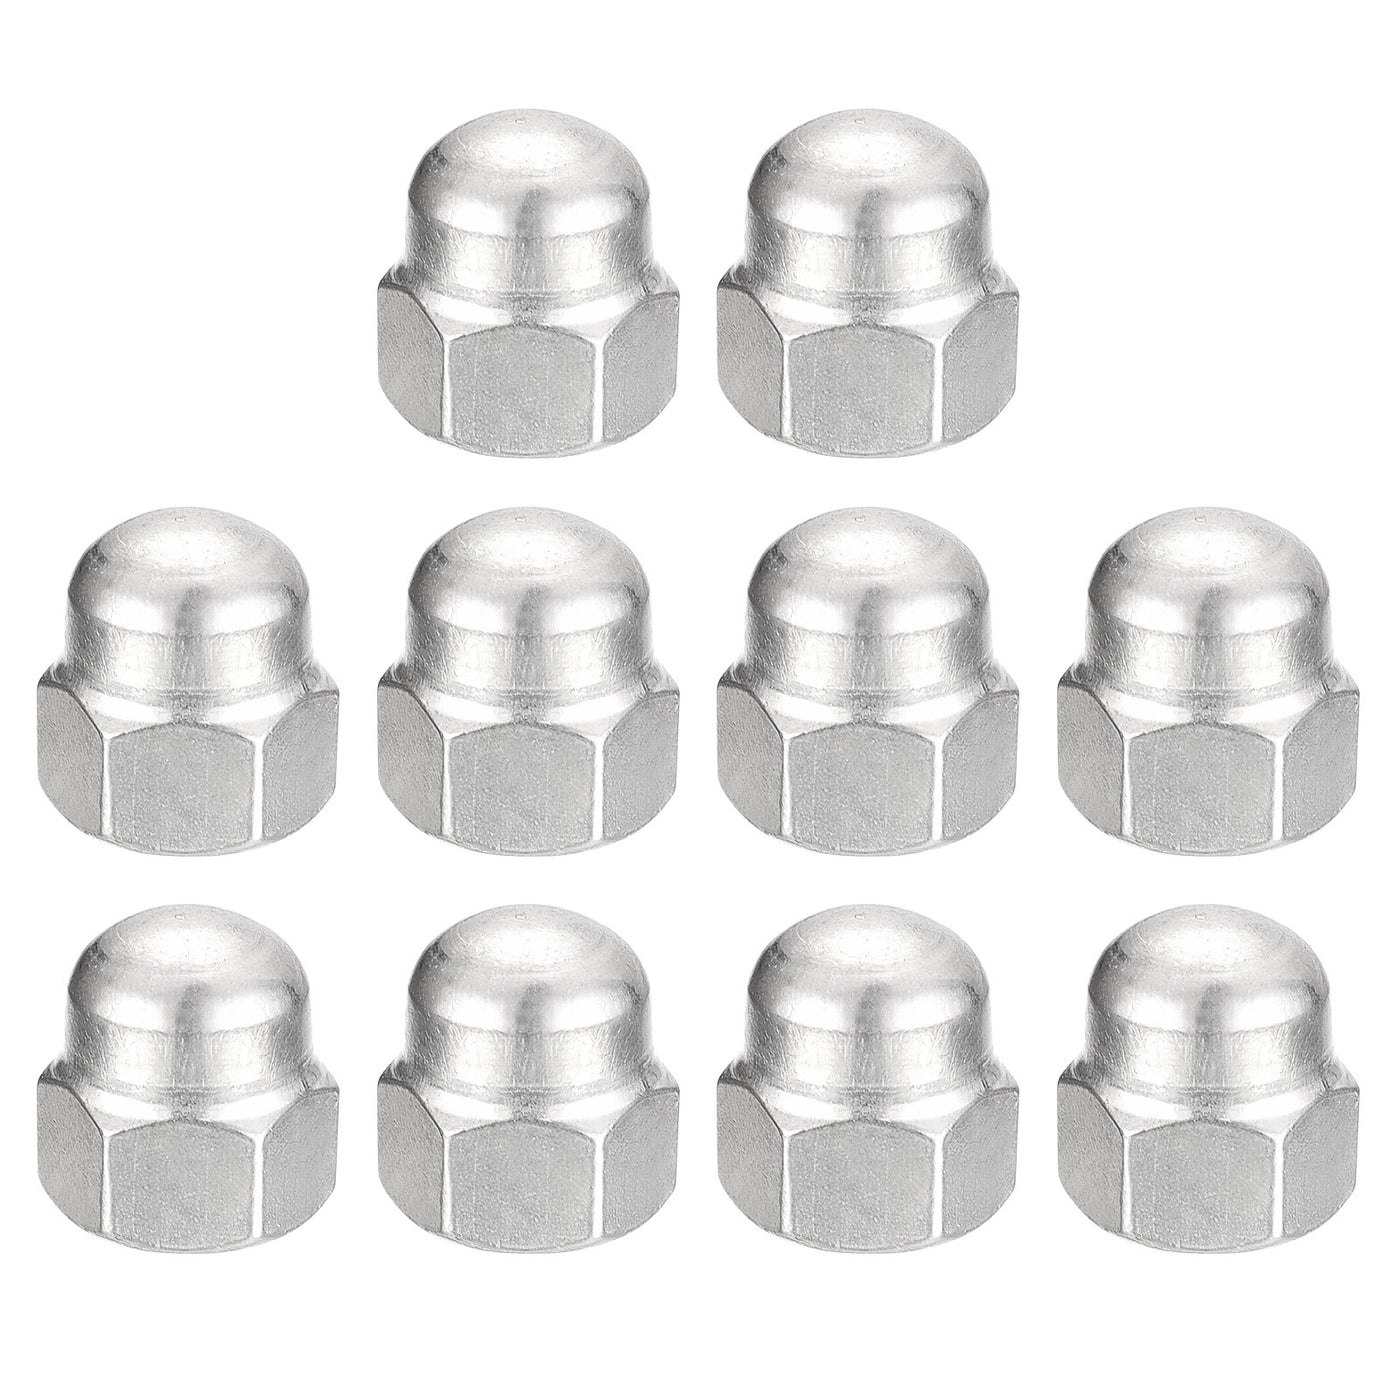 uxcell Uxcell 7/16-14 Acorn Cap Nuts,10pcs - 304 Stainless Steel Hardware Nuts, Acorn Hex Cap Dome Head Nuts for Fasteners (Silver)